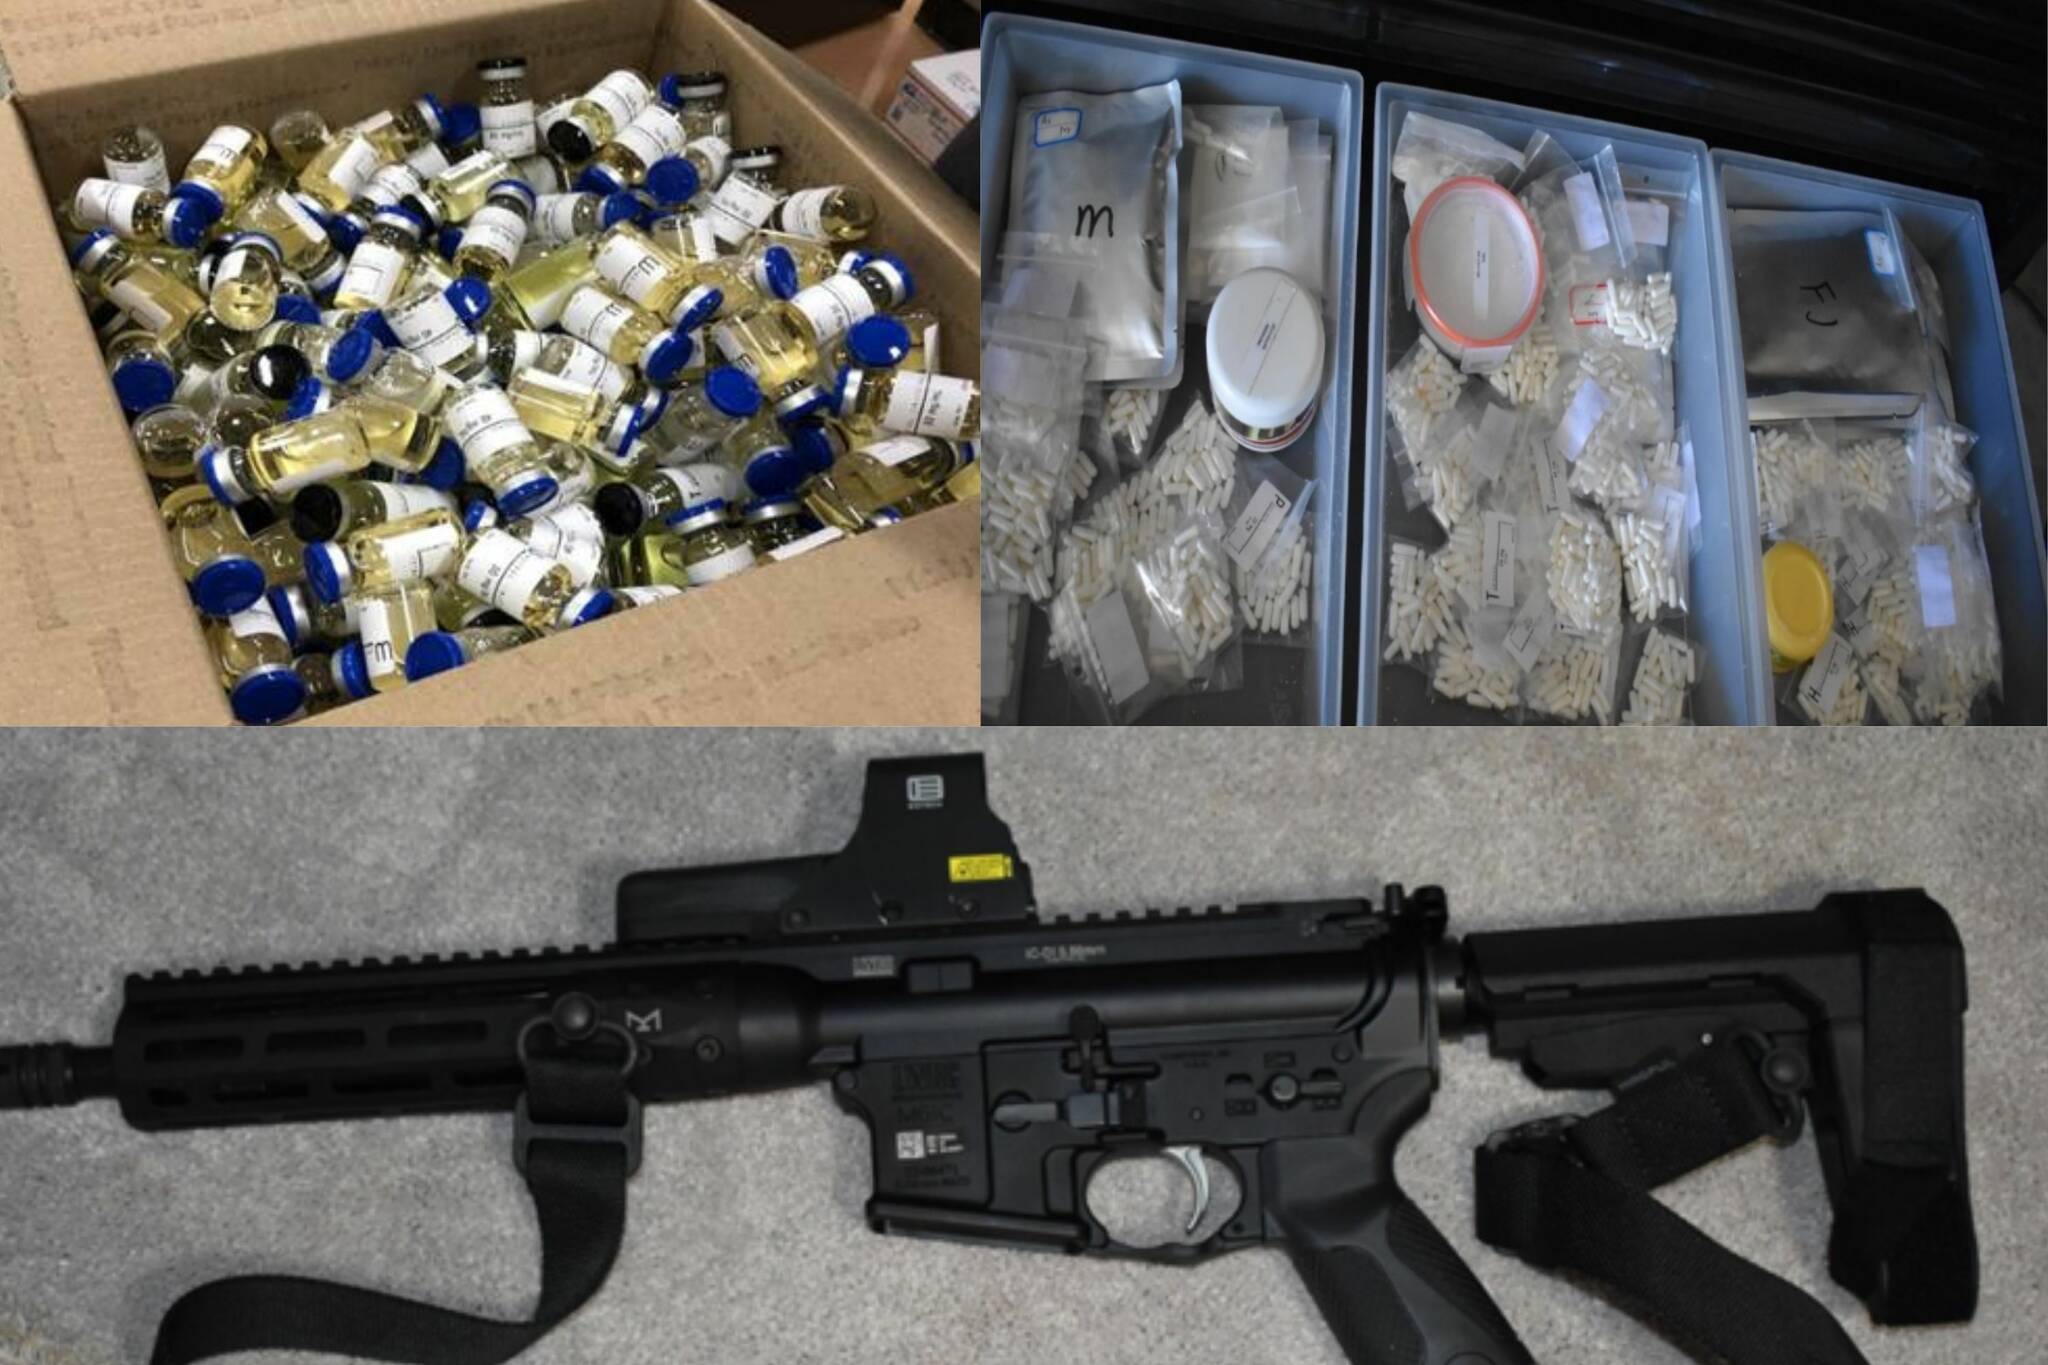 Intercepted box of illegal anabolic steroids, containers of illegal anabolic steroid pills and powder, and a firearm seized during warrant application. (Courtesy of City of Kirkland)